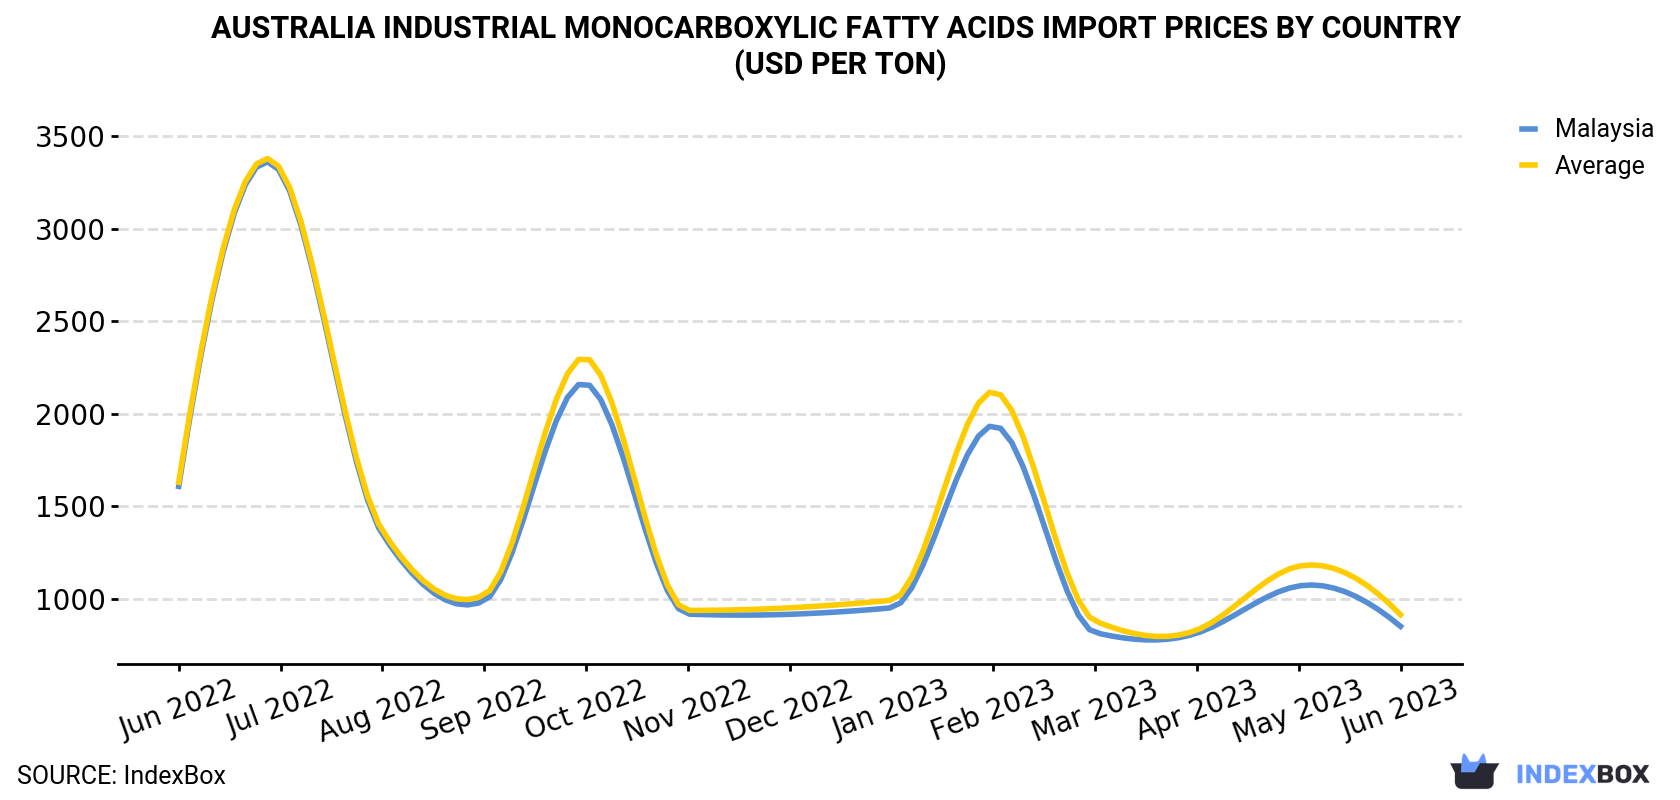 Australia Industrial Monocarboxylic Fatty Acids Import Prices By Country (USD Per Ton)